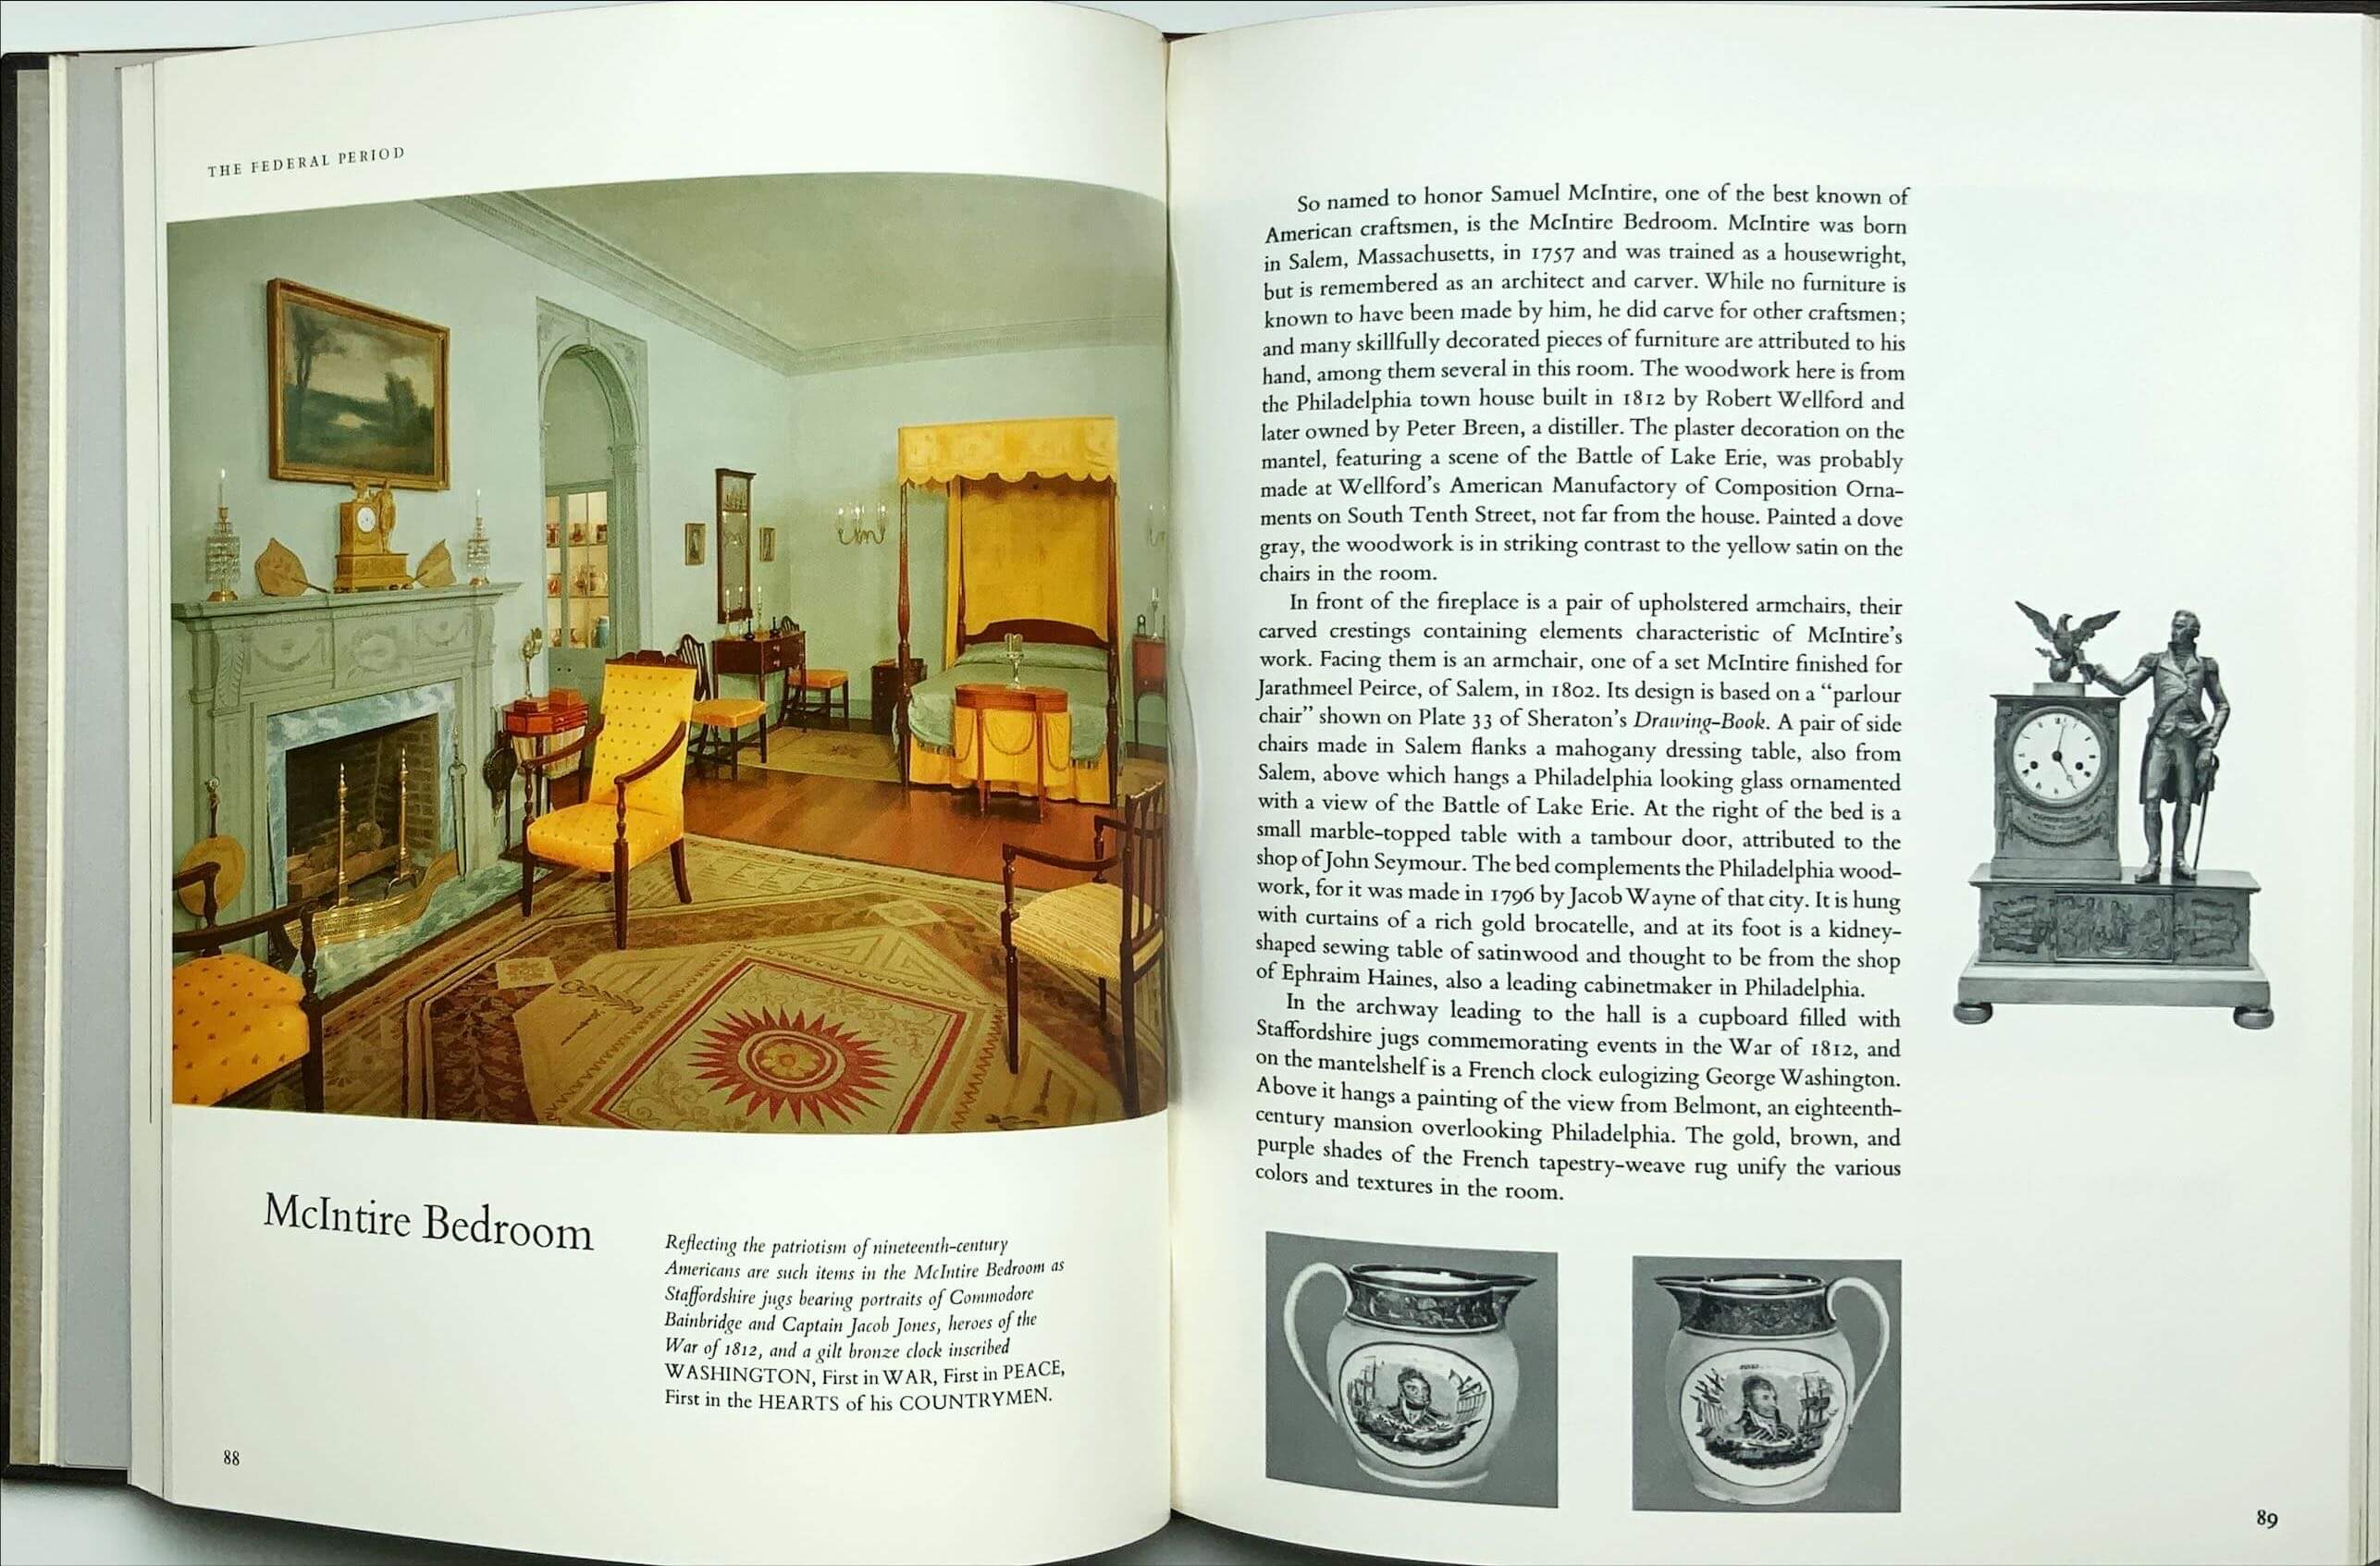 Conzett & Huber: Early American Rooms, 1963